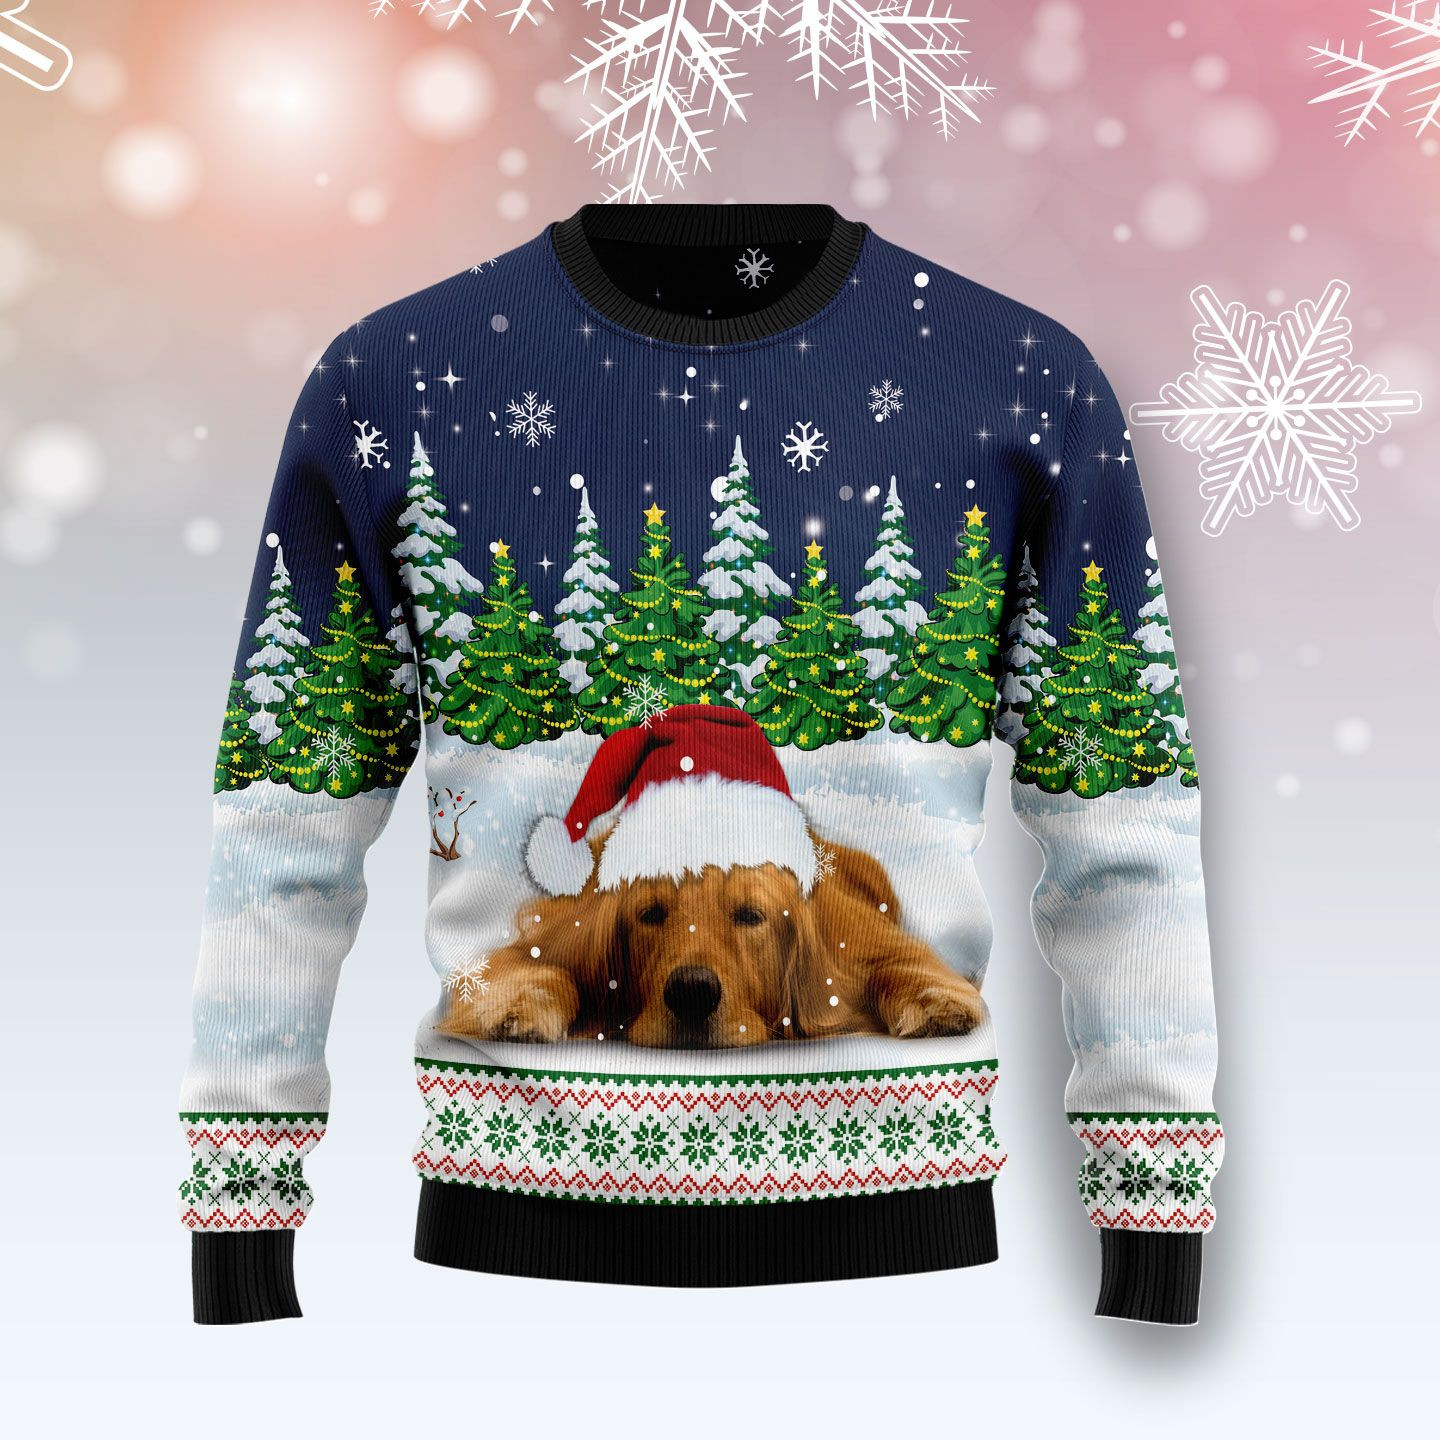 Dreaming Golden Retriever Under Snow Ugly Christmas Sweater Ugly Sweater For Men Women